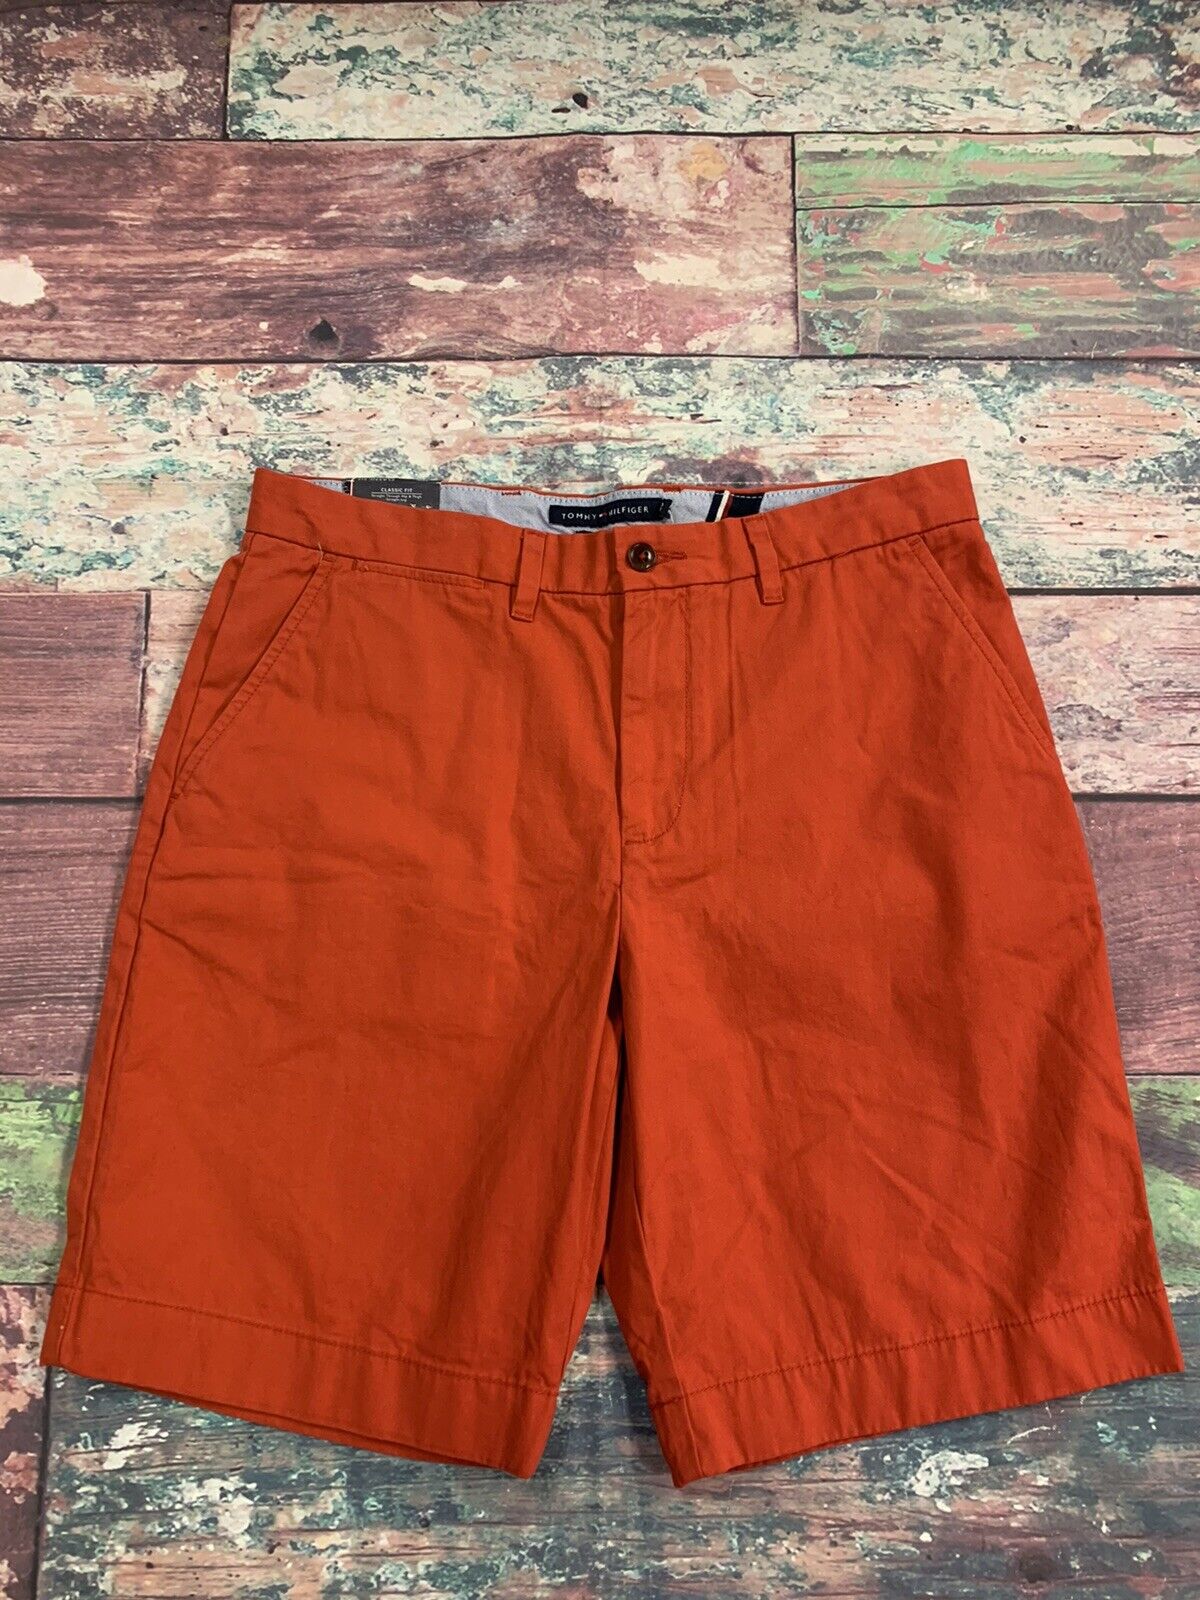 Tommy Hilfiger Classic Fit Red Shorts Mens Size 33